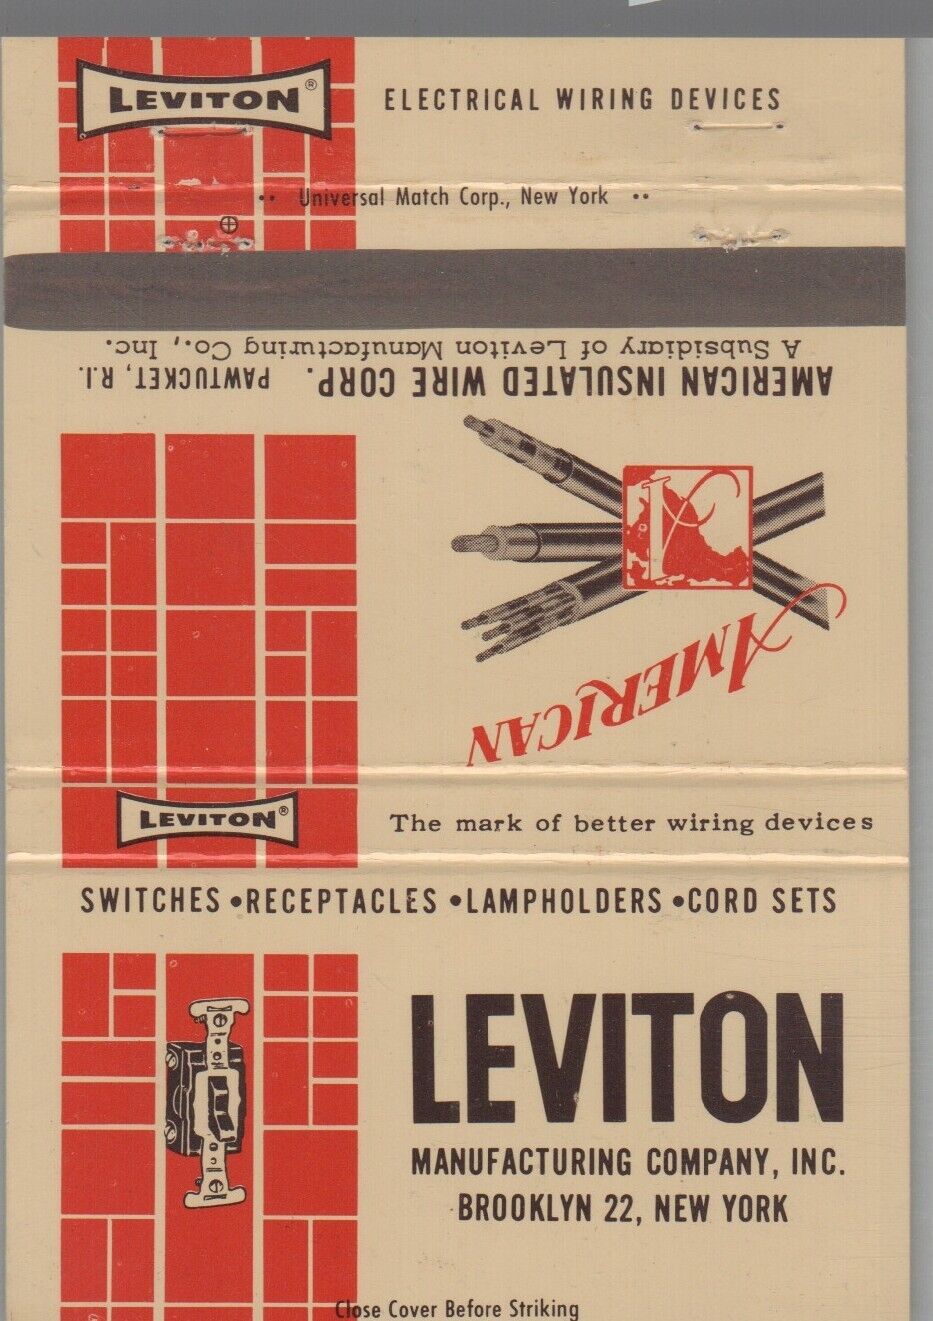 40 Strike Matchbook Cover - Leviton Manufacturing Co. Brooklyn, NY